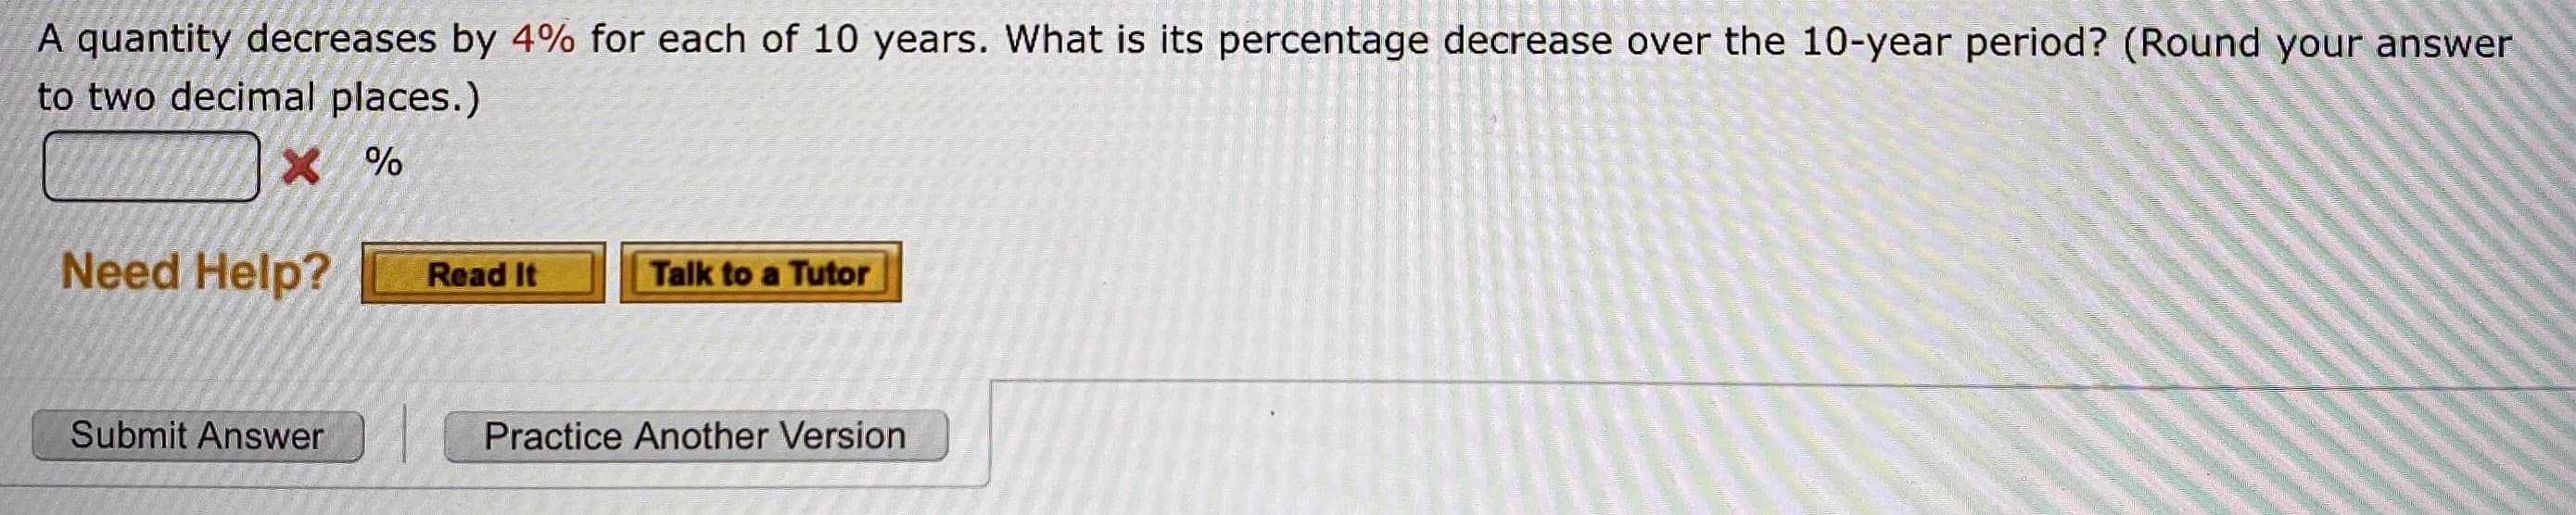 A quantity decreases by 4% for each of 10 years. What is its percentage decrease over the 10-year period? (Round your answer
to two decimal places.)
Need Help?
Read It
Talk to a Tutor
Submit Answer
Practice Another Version
